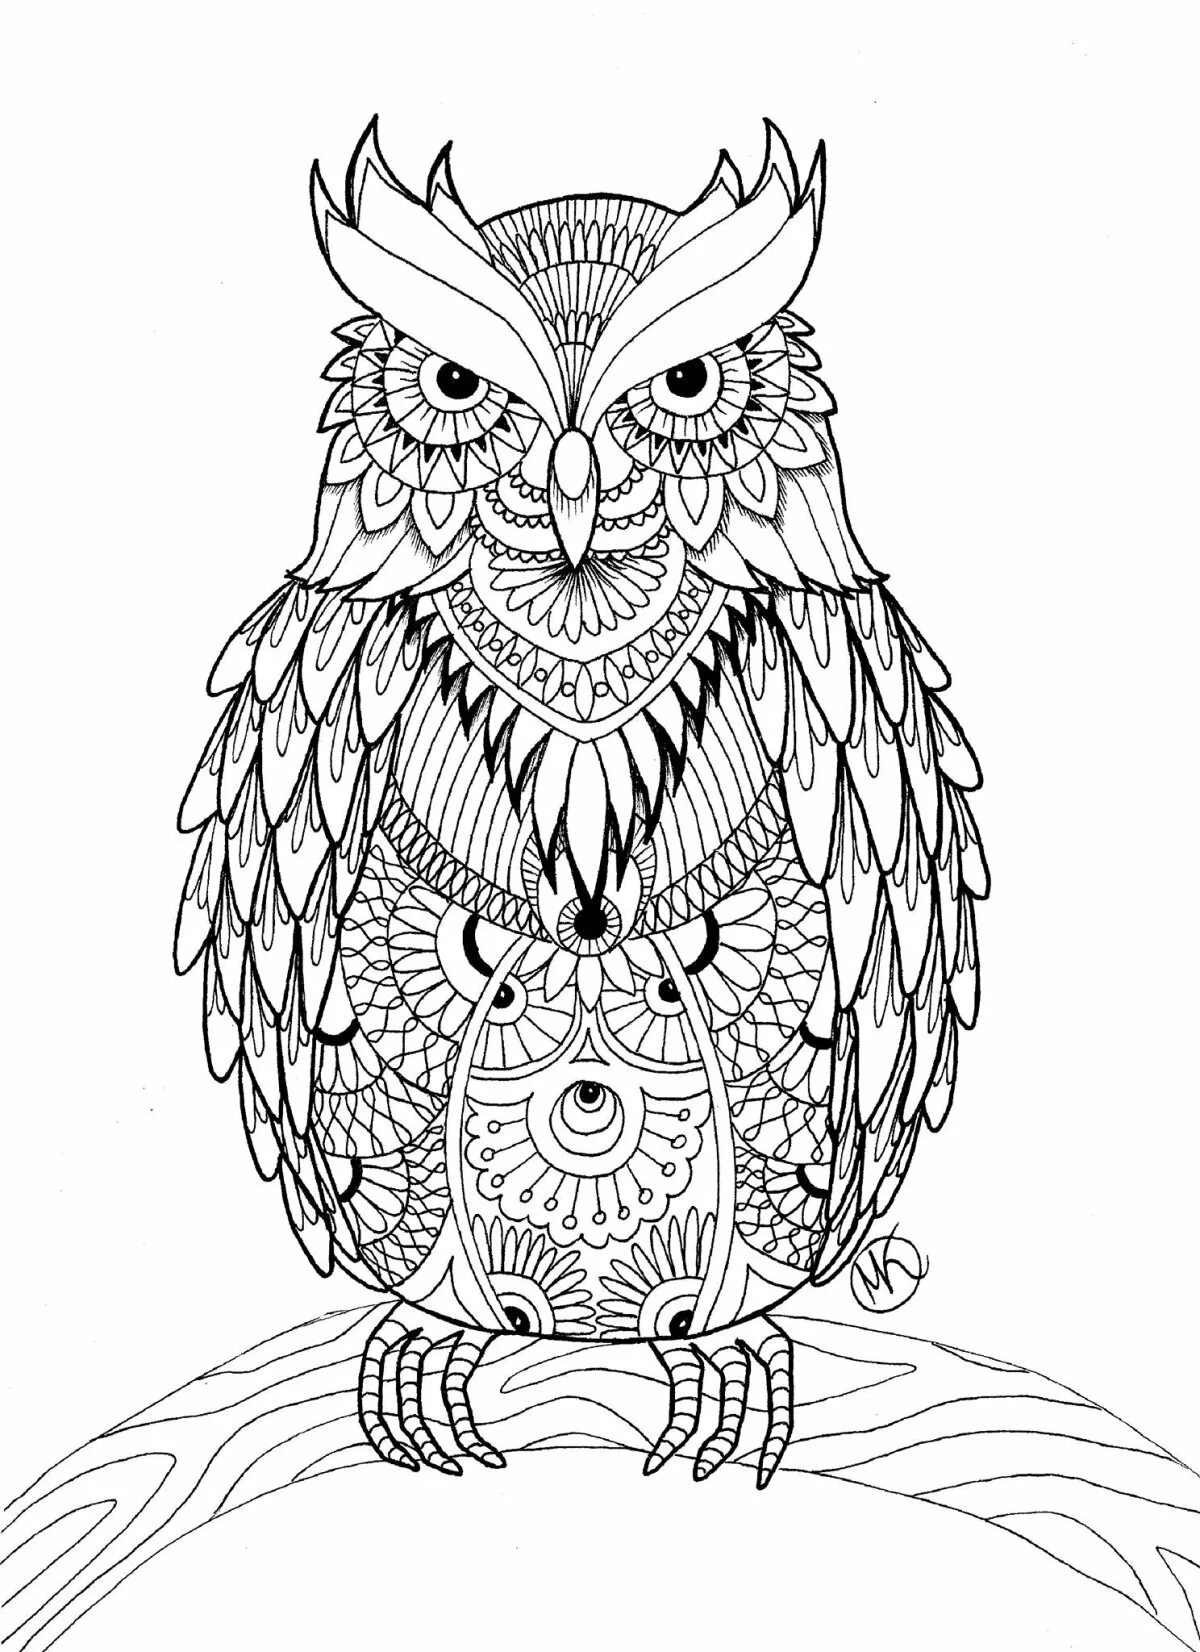 Outstanding coloring complex owl